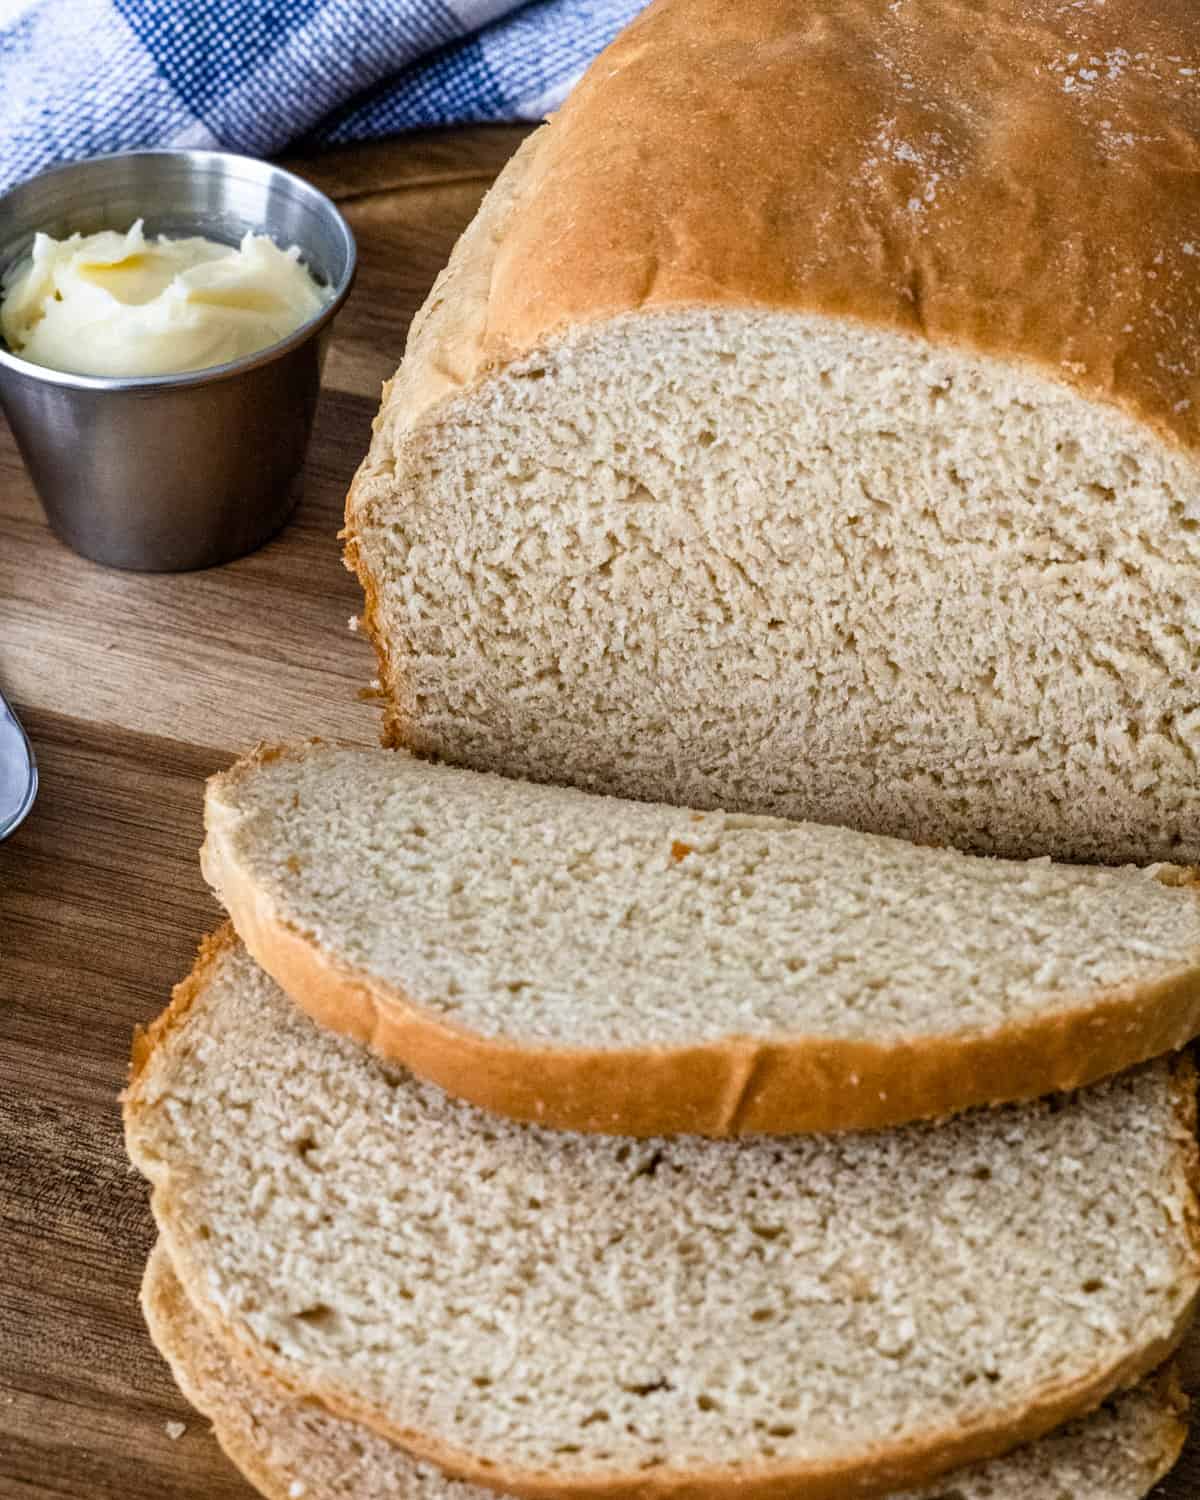 Loaf of bread with 3 slices, and a ramekan of butter on the side.